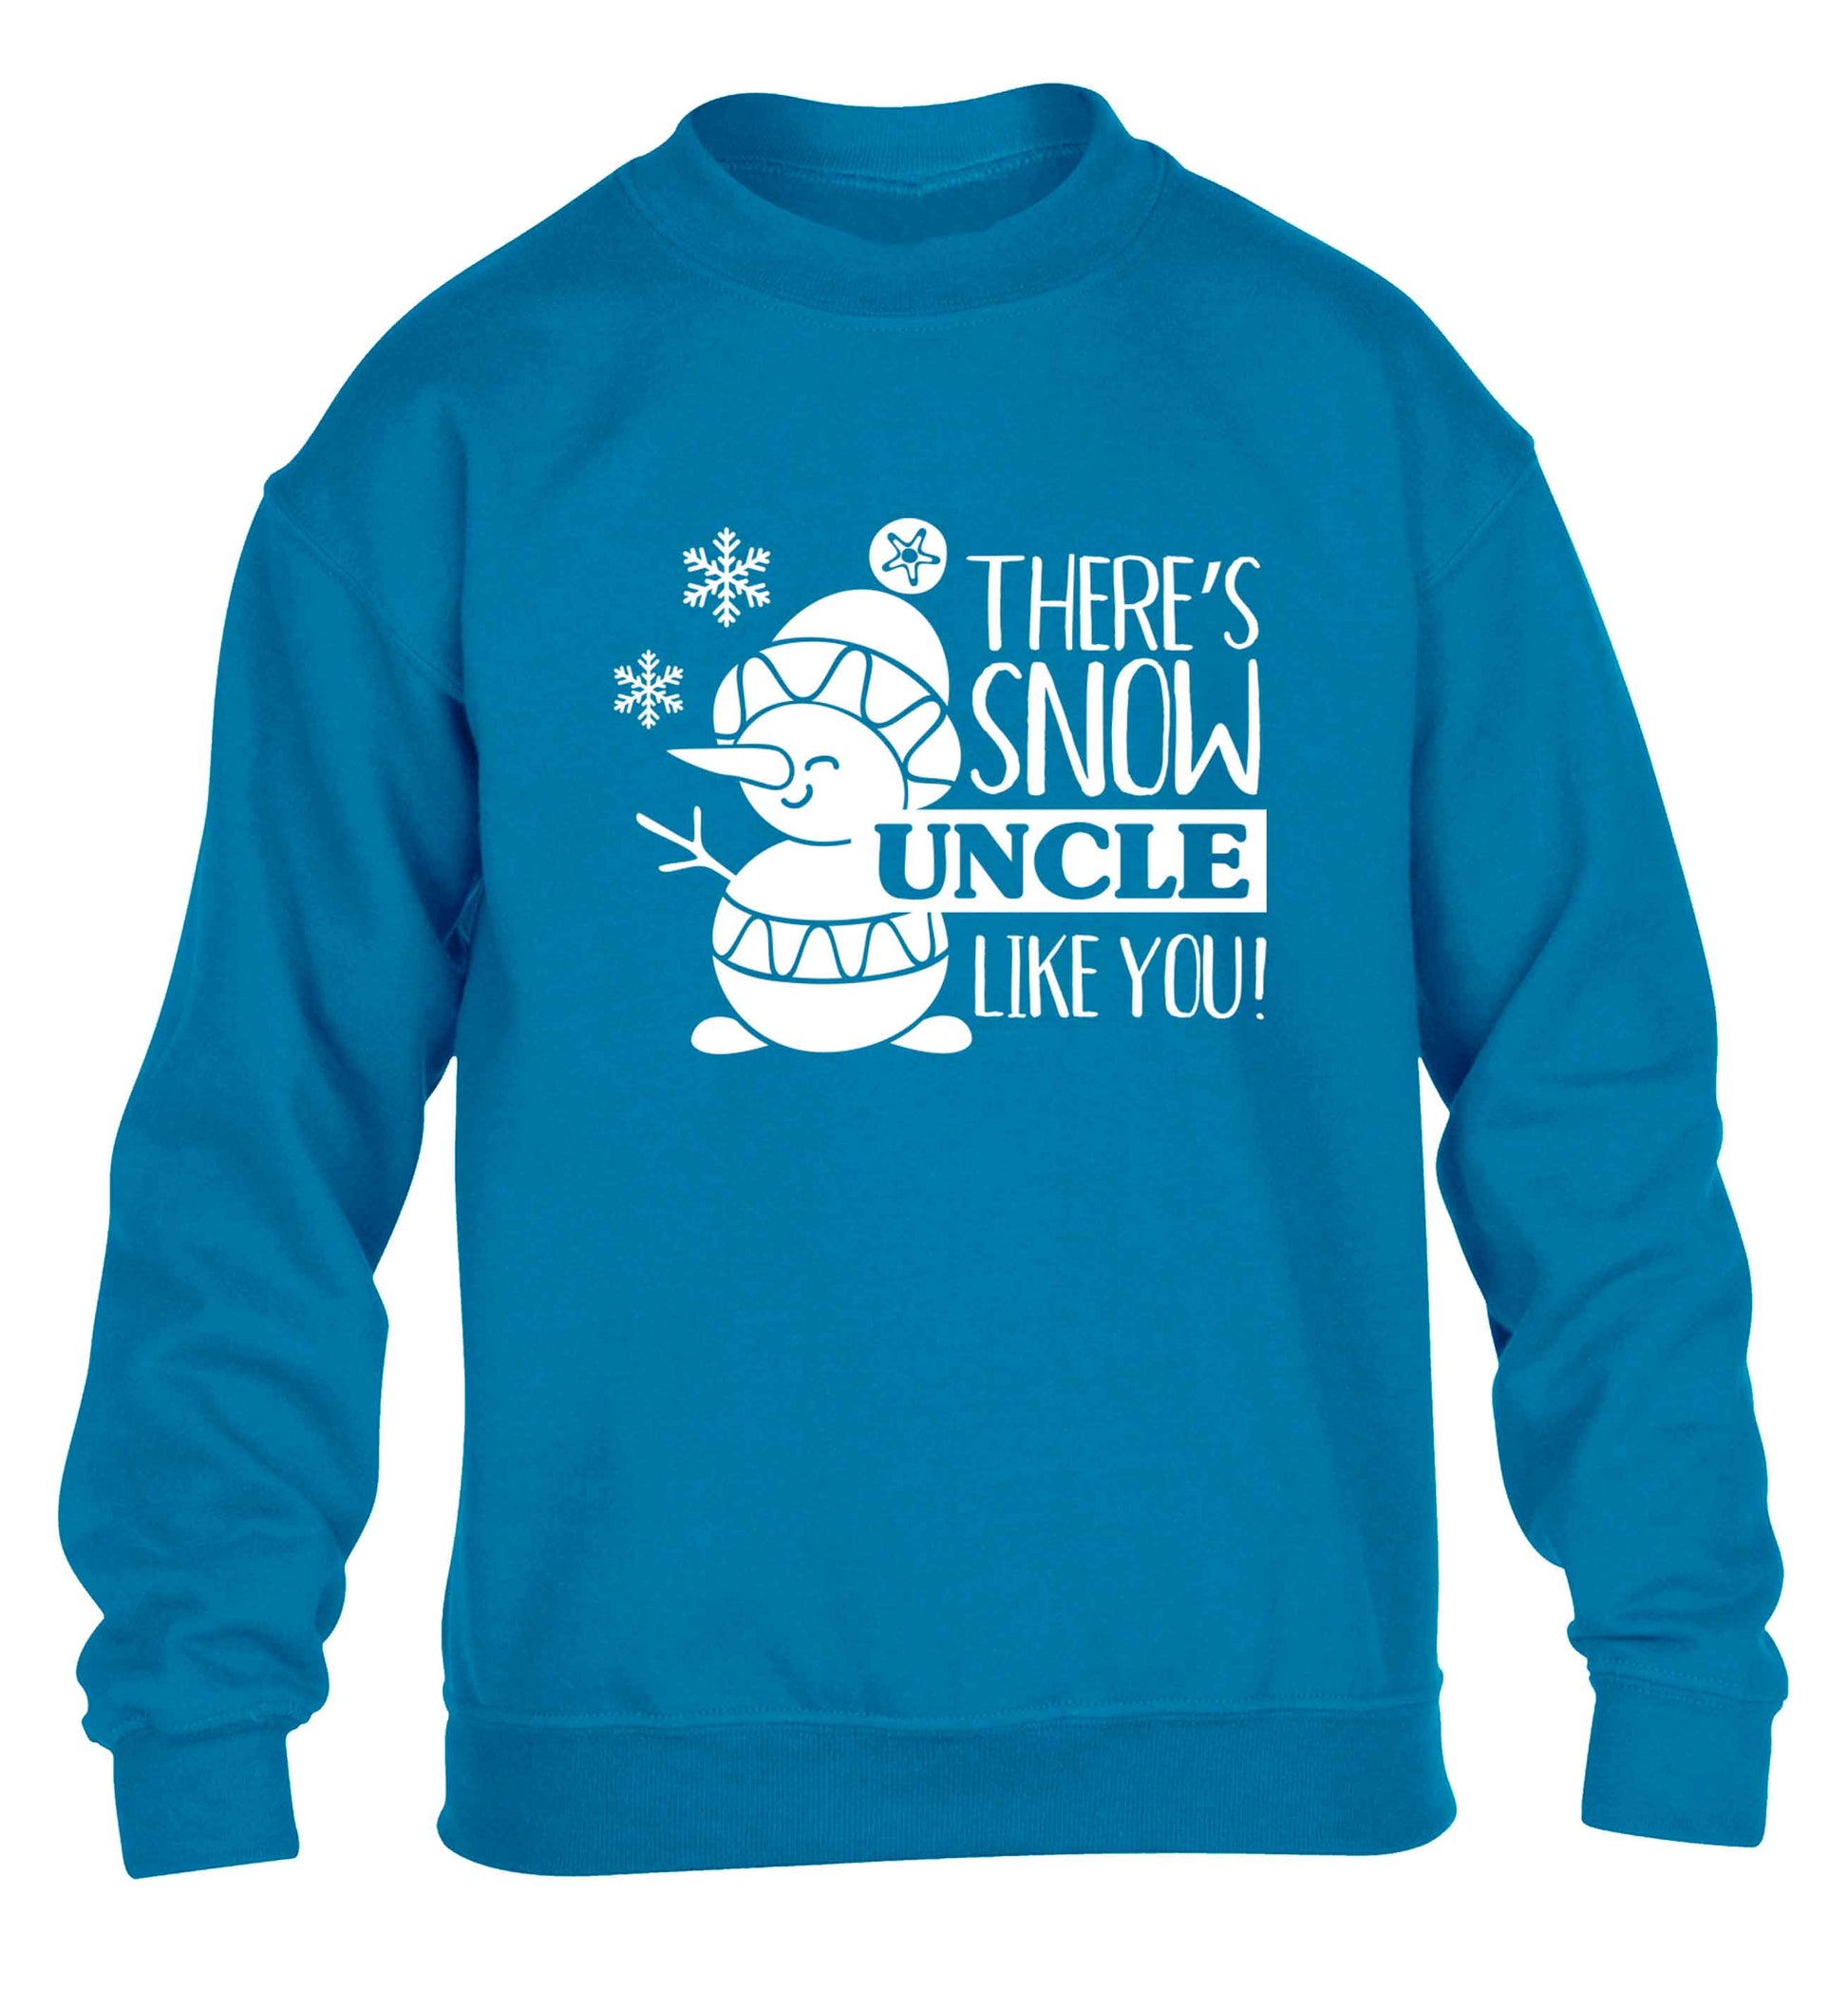 There's snow uncle like you children's blue sweater 12-13 Years